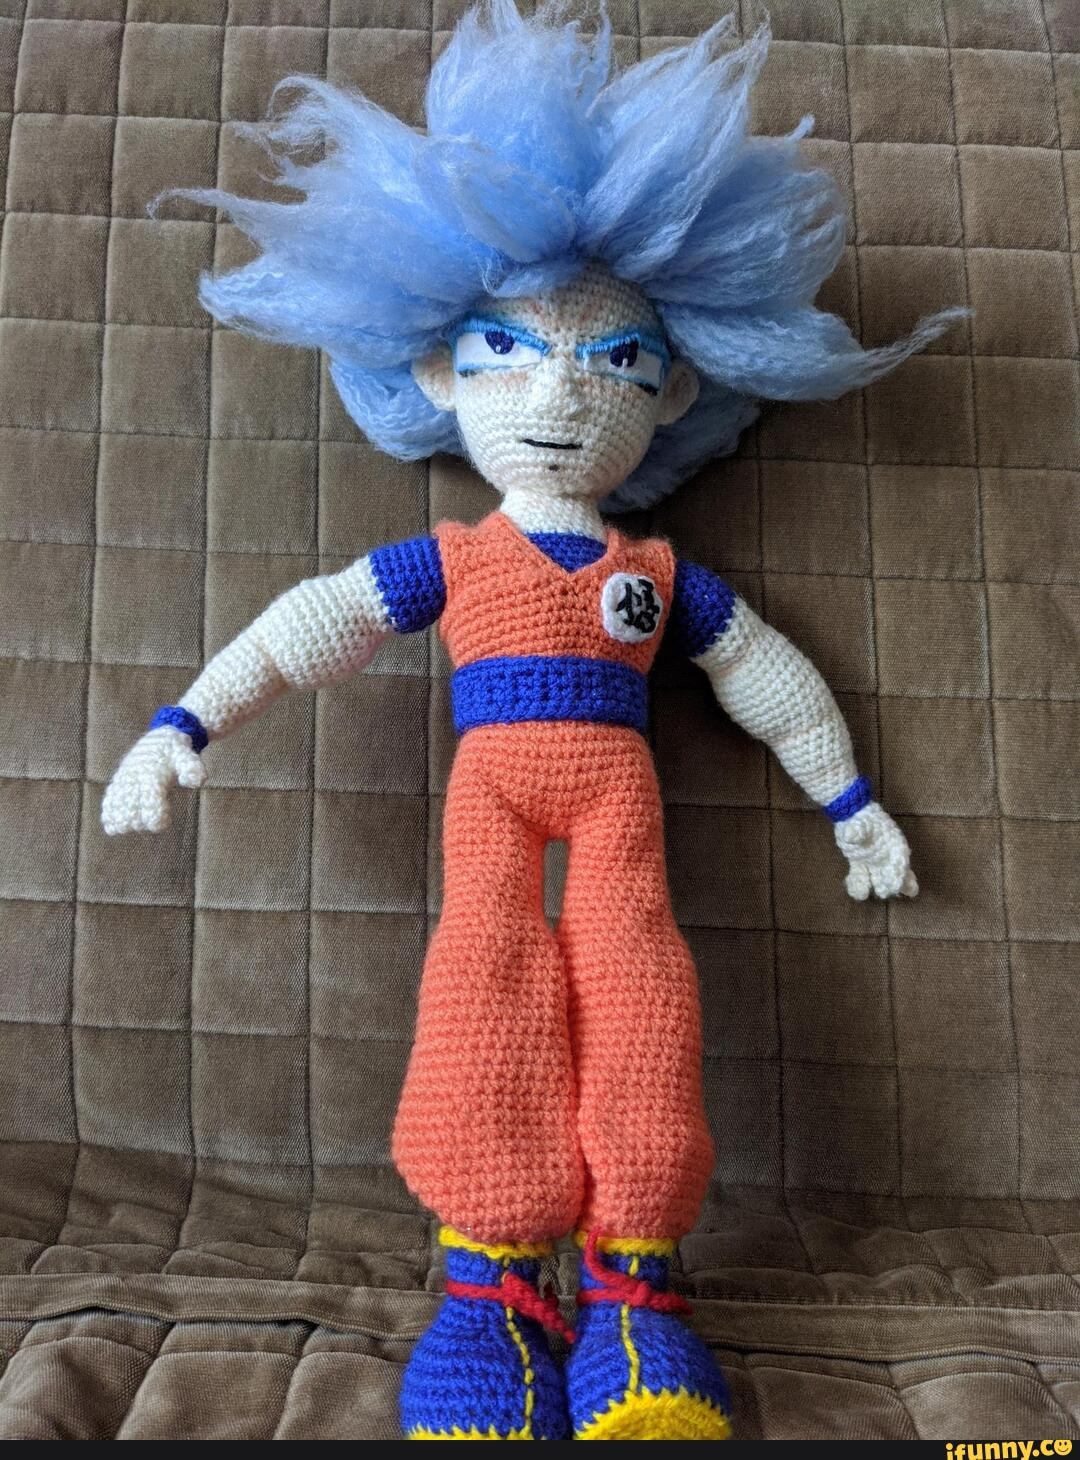 A crochet of goku my mom made for me knowing I am a huge DB fan. Thought  you might appreciate it. - iFunny Brazil